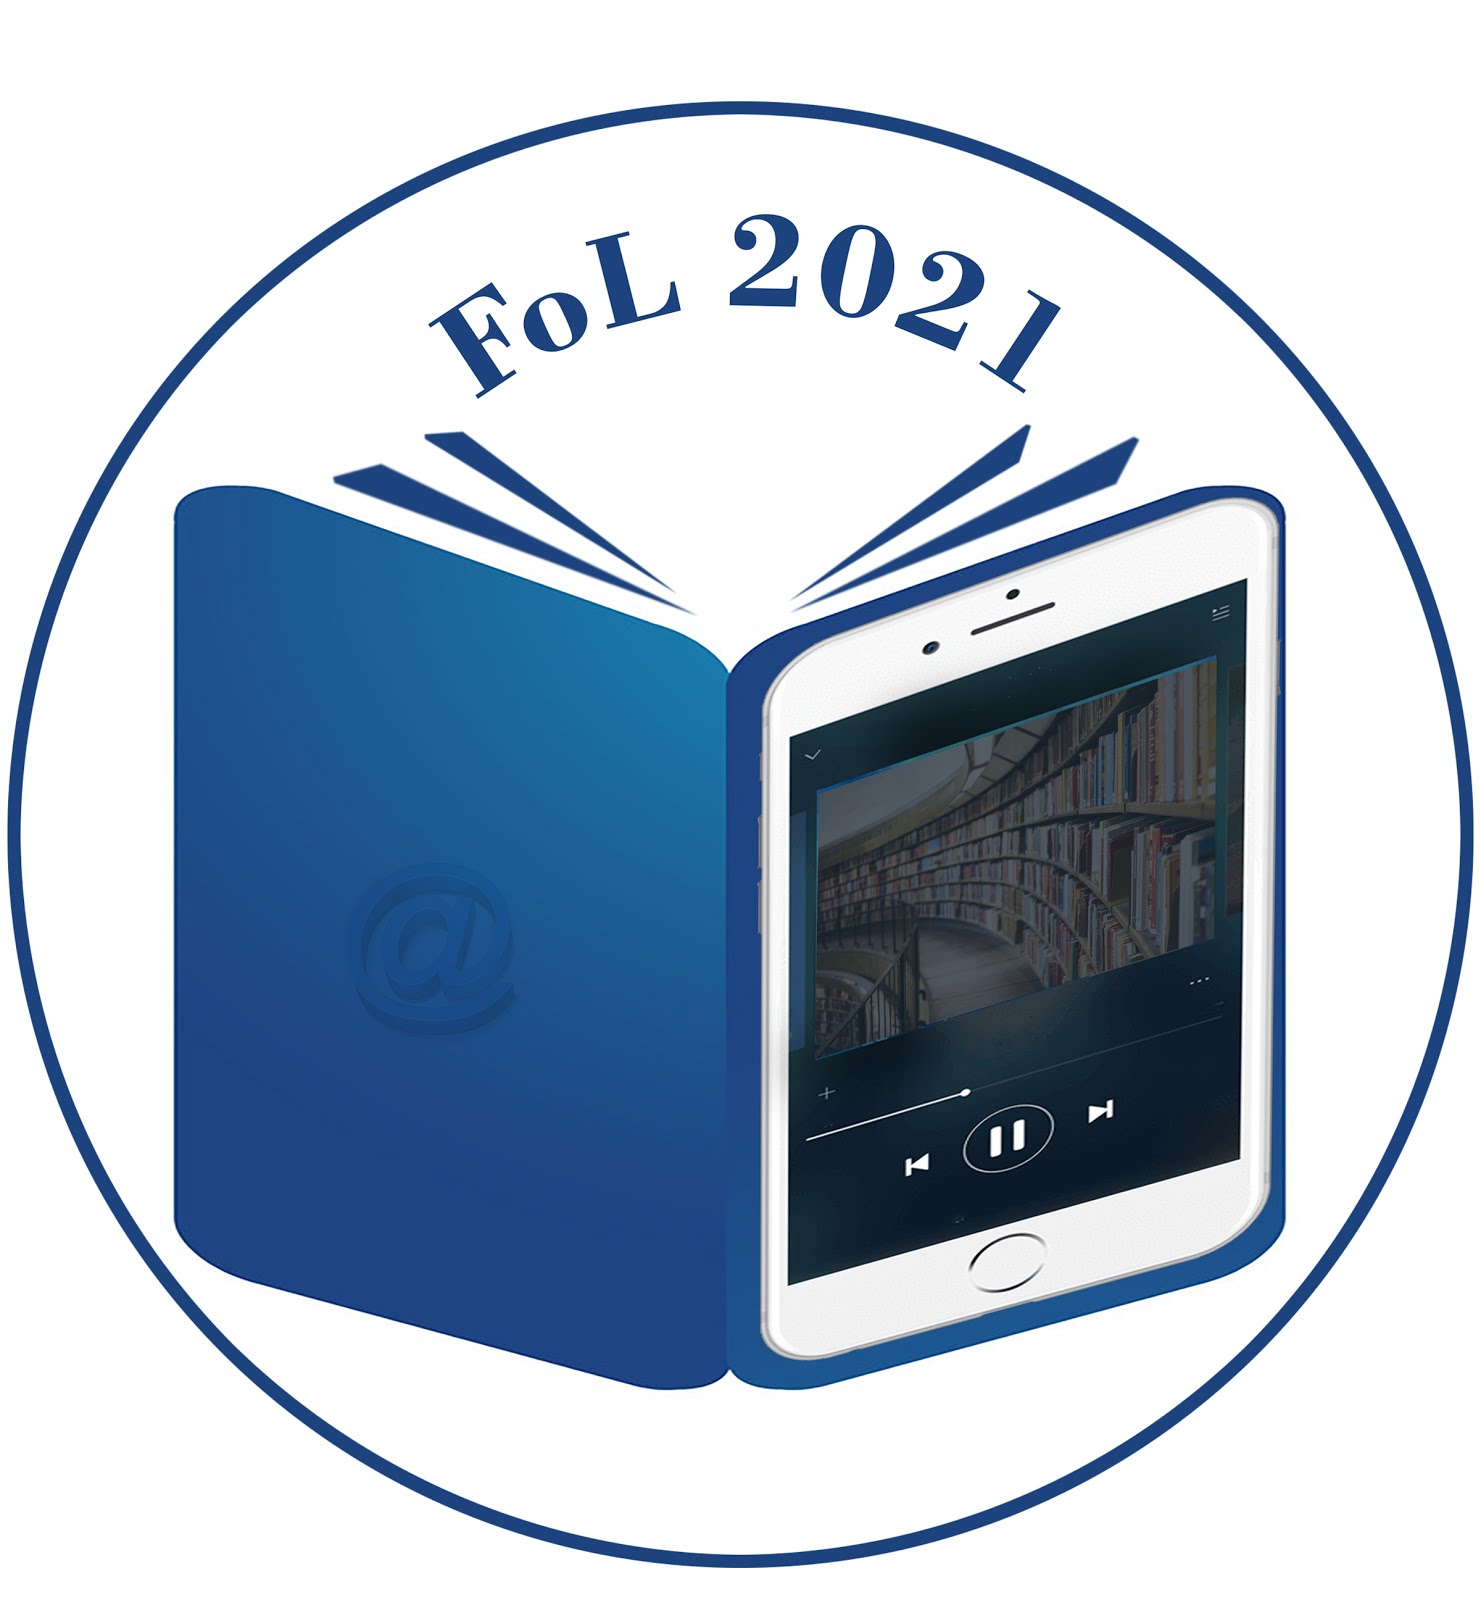 Future of Libraries 2021